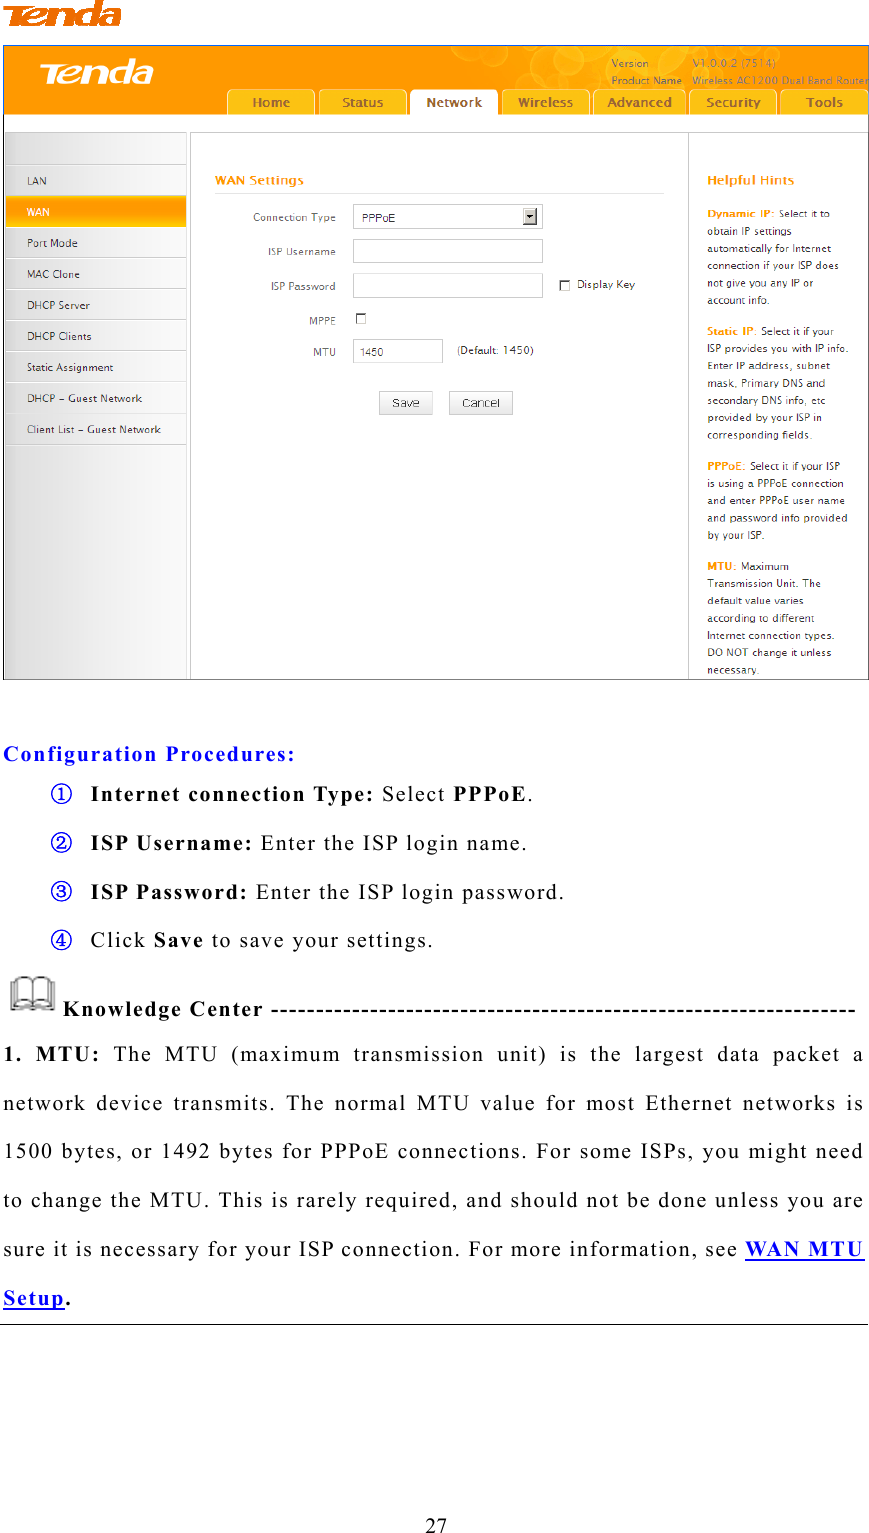                                 27   Configuration Procedures: ① Internet connection Type: Select PPPoE. ② ISP Username: Enter the ISP login name. ③ ISP Password: Enter the ISP login password. ④ Click Save to save your settings. Knowledge Center ----------------------------------------------------------------- 1. MTU: The MTU (maximum transmission unit) is the largest data packet a network device transmits. The normal MTU value for most Ethernet networks is 1500 bytes, or 1492 bytes for PPPoE connections. For some ISPs, you might need to change the MTU. This is rarely required, and should not be done unless you are sure it is necessary for your ISP connection. For more information, see WAN MTU Setup.    